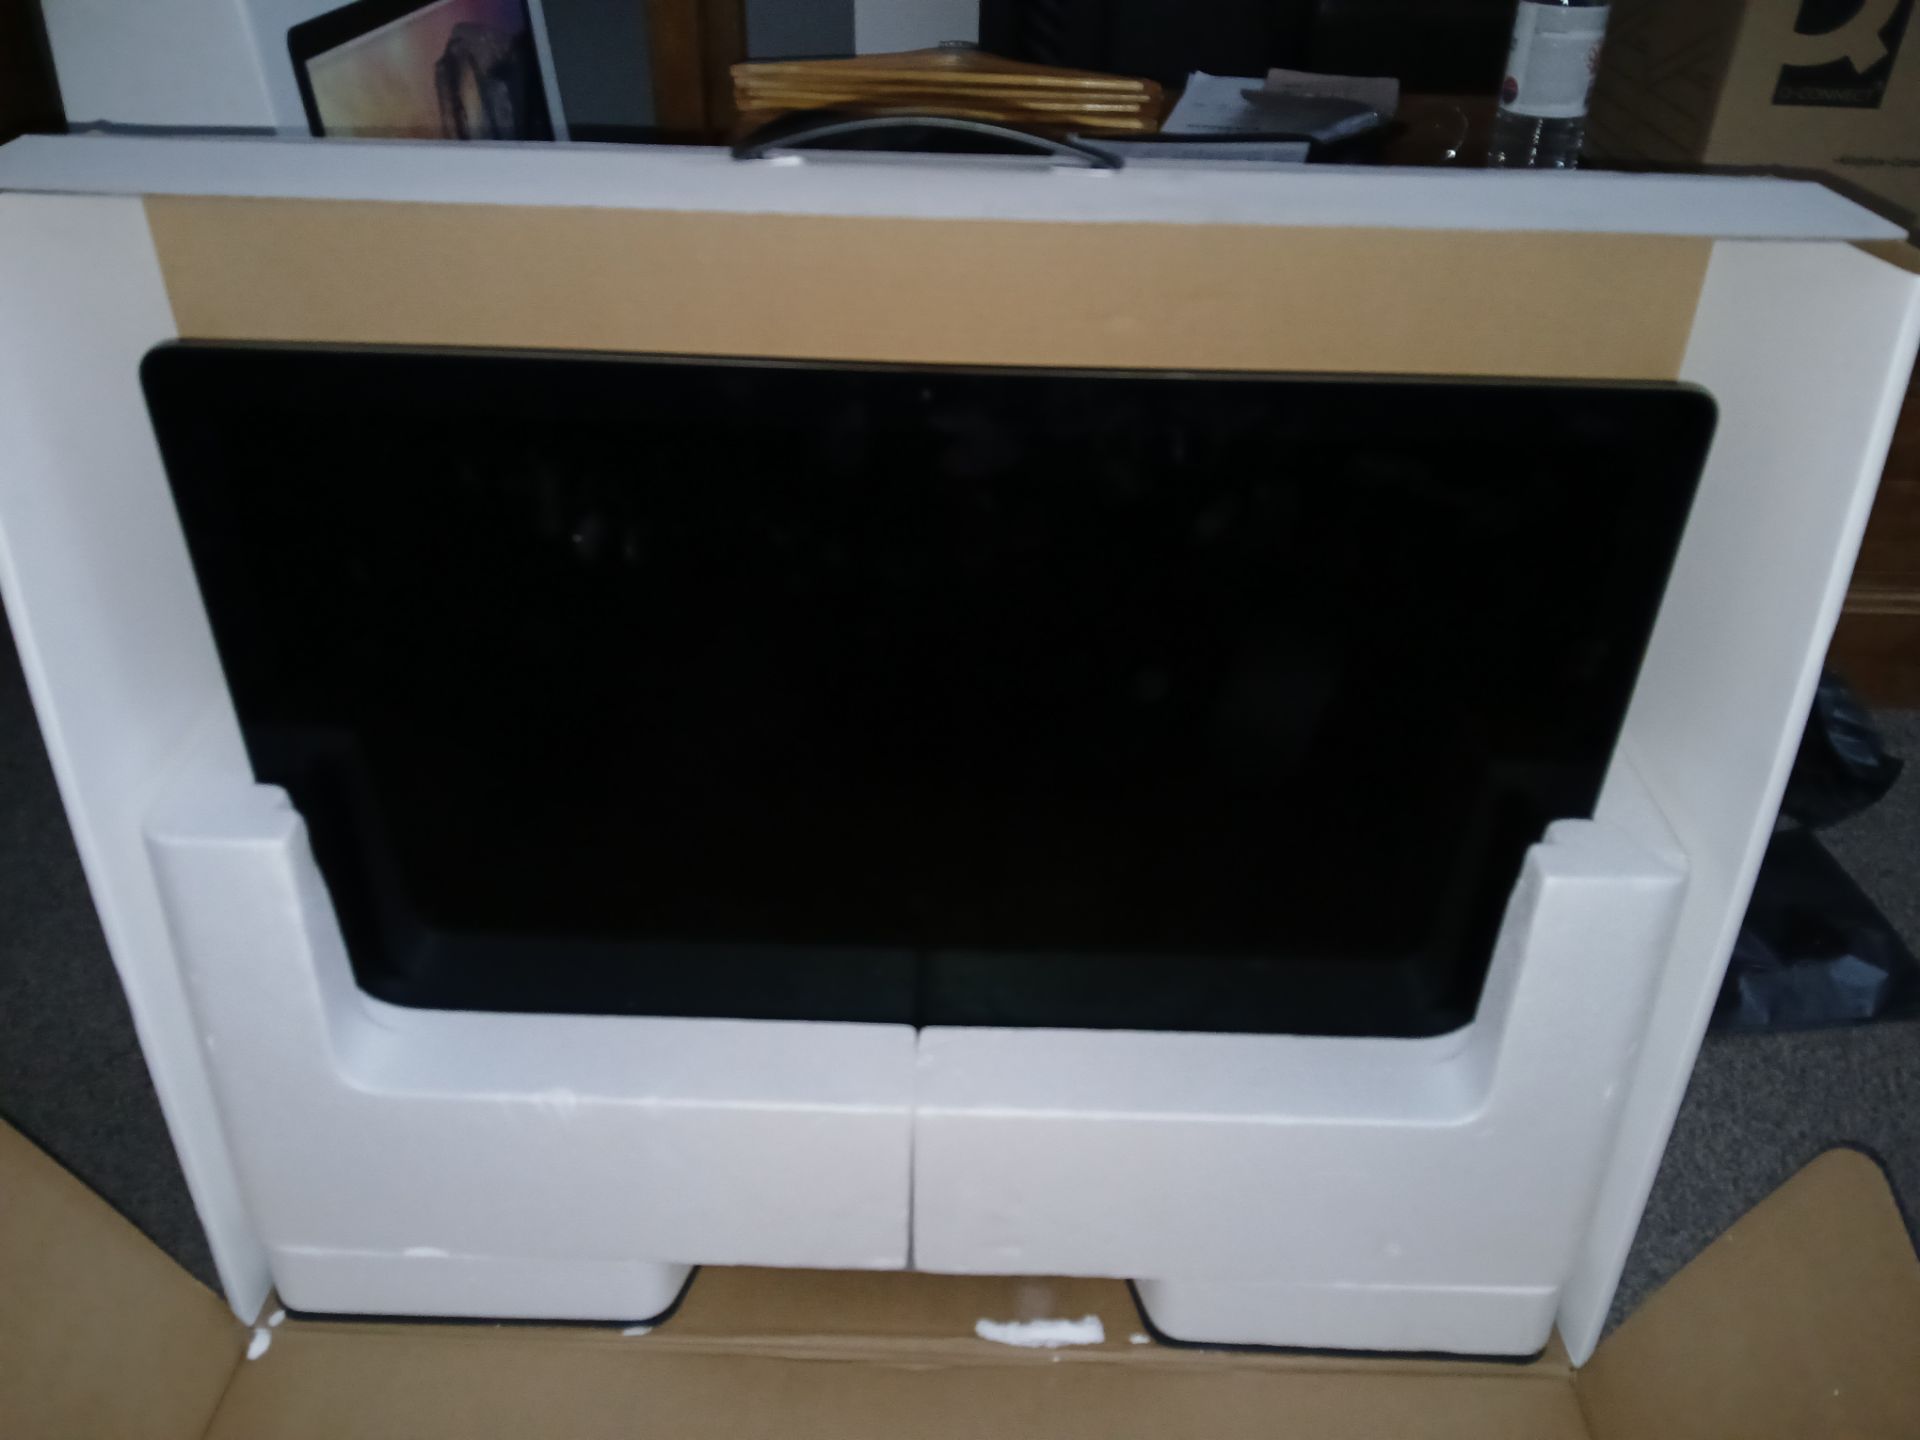 Apple iMac (Retina 5K, 27”, Mid 2015), Serial Number DGKQ306WFY13, with keyboard (No Mouse or - Image 13 of 14